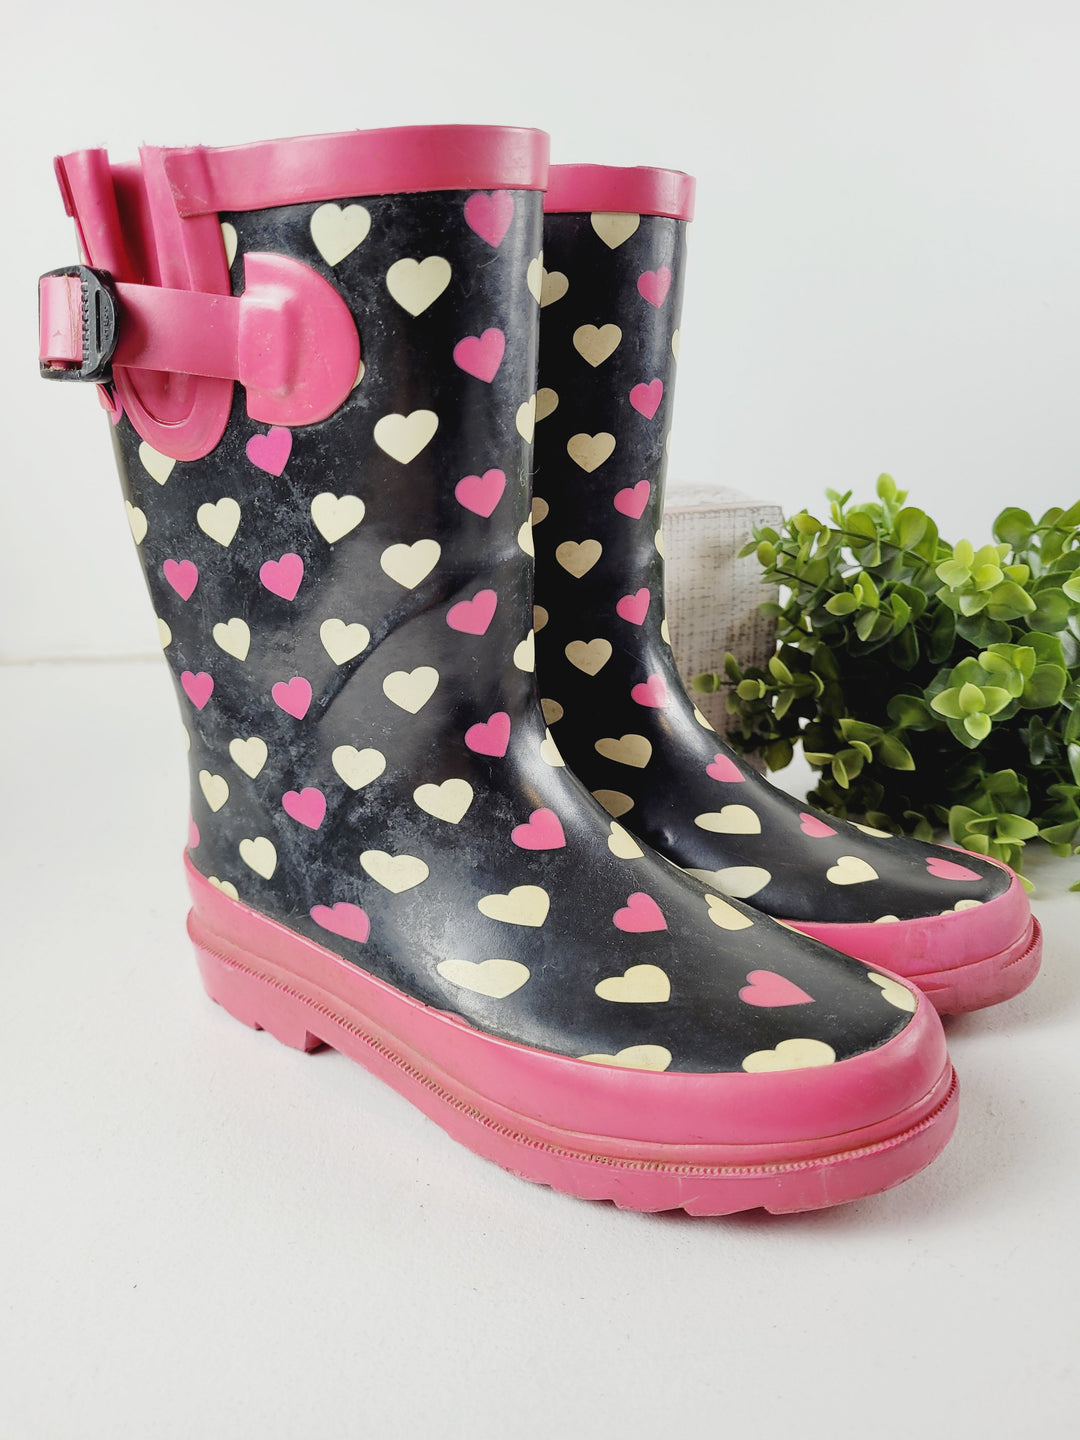 OUTBOUND PINK/BLACK HEART RAIN BOOTS SIZE 2Y VGUC/GUC